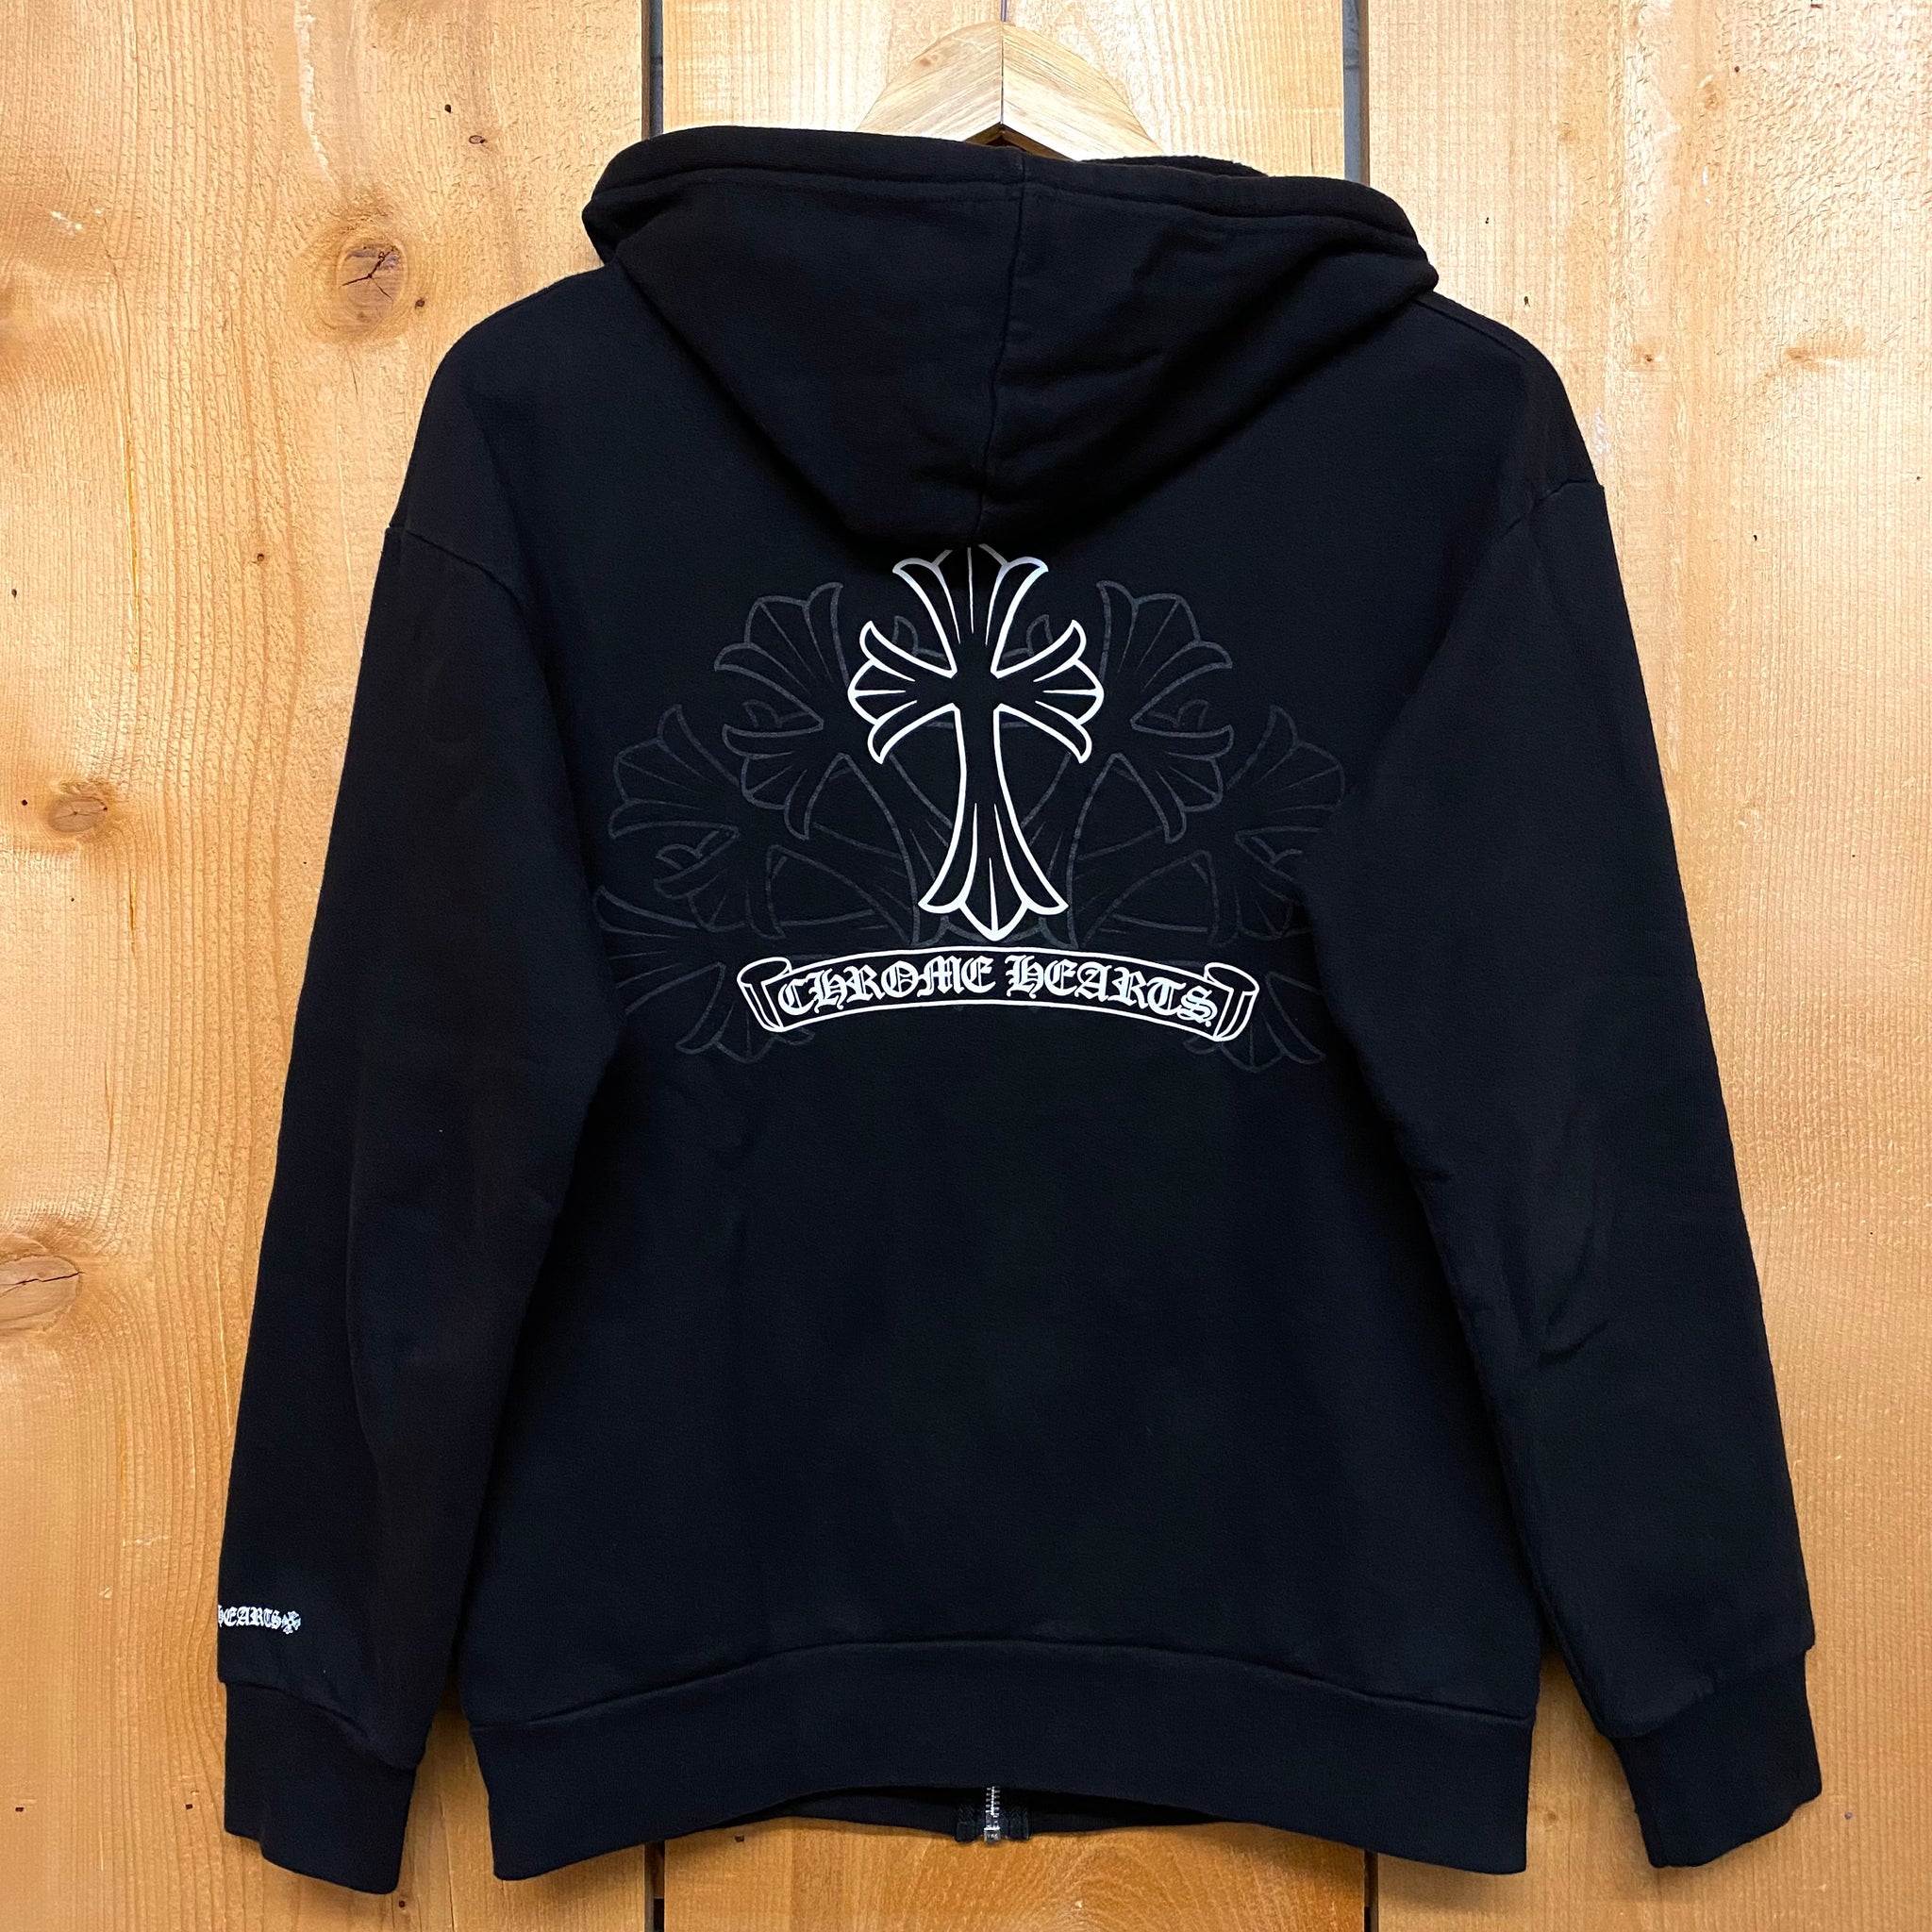 chrome hearts cross dagger zip up hoodie – change clothes